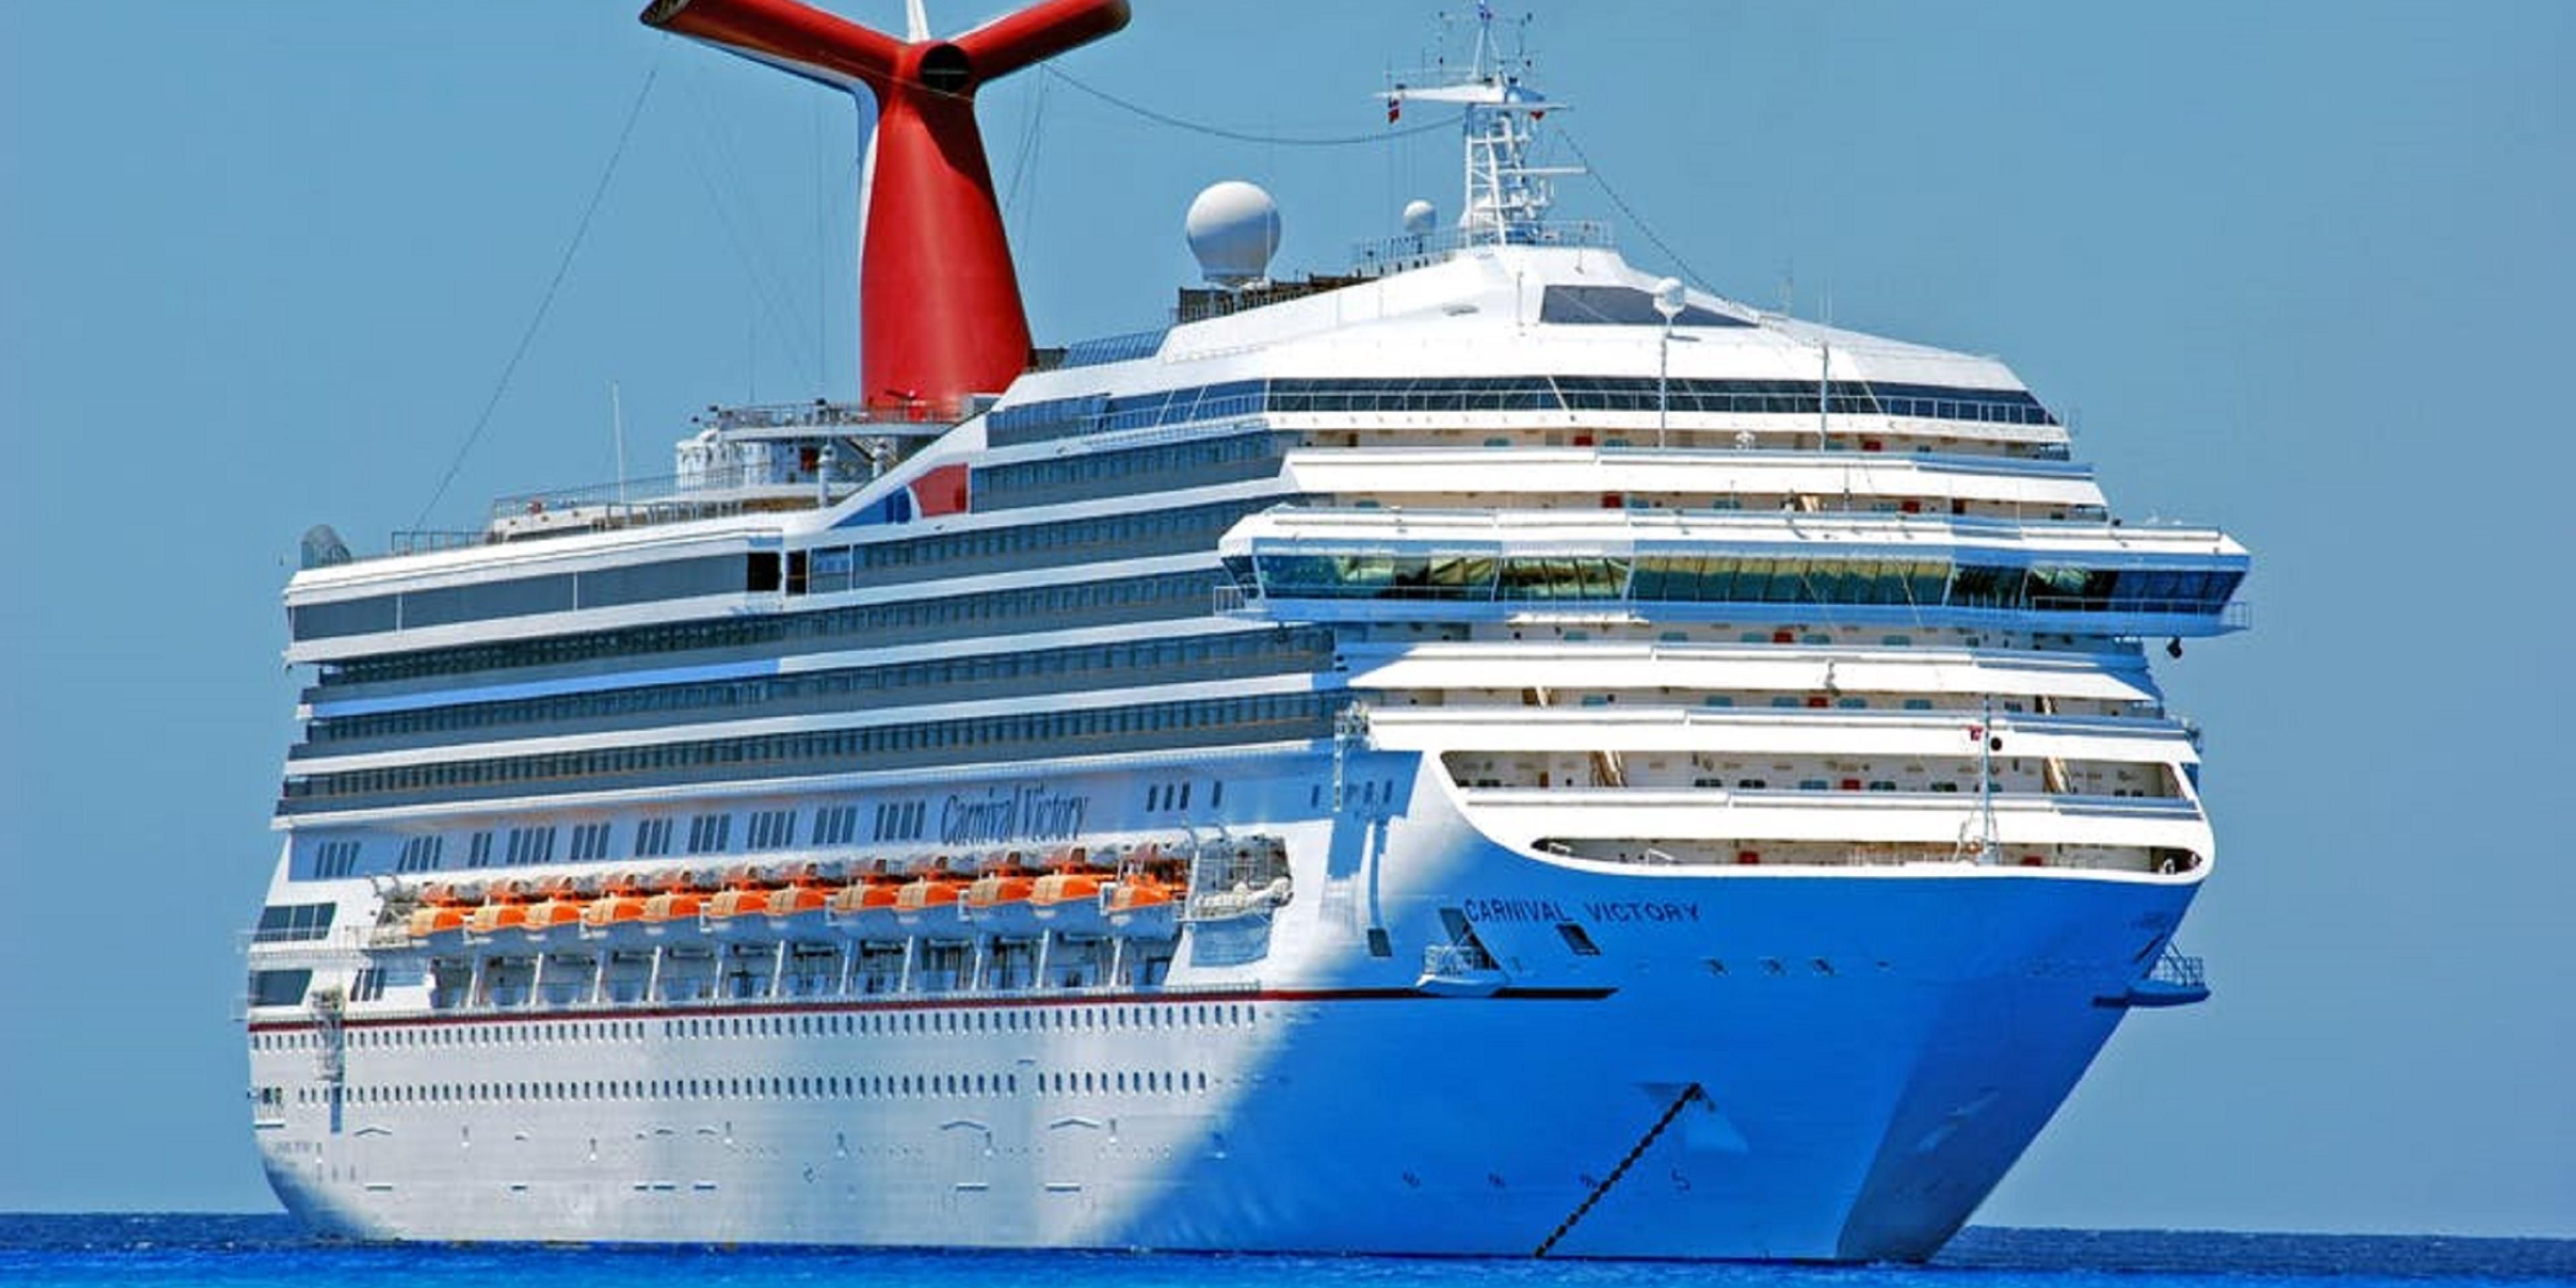 We are the closest hotel to the port for the Carnival Cruise line which makes us the ideal option for lodging.  Ask about our Park & Cruise package